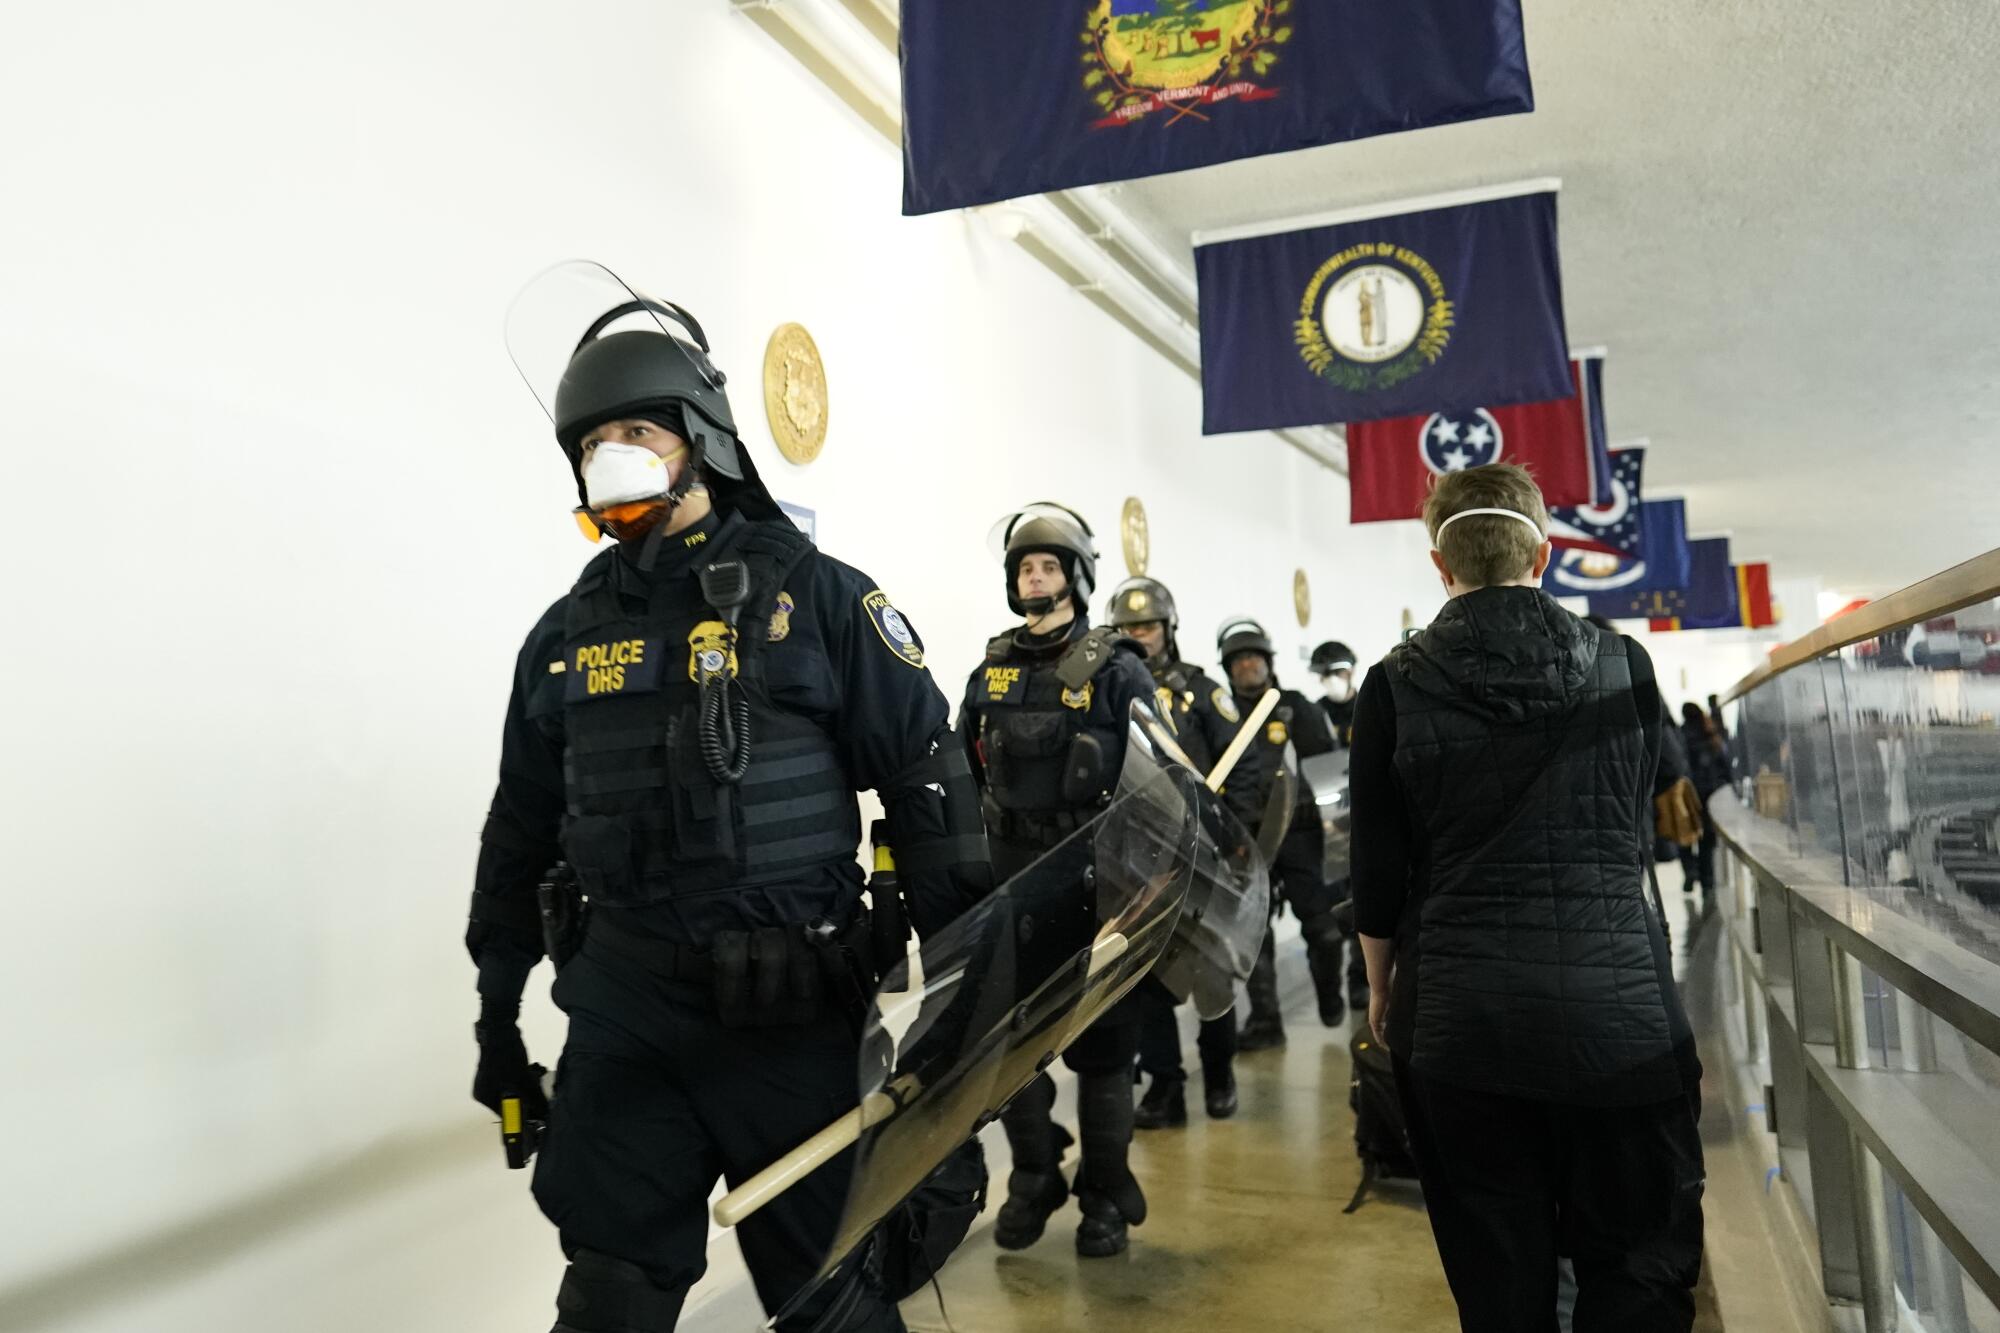 Police arrive at the Capitol to quite the protesters during the joint 